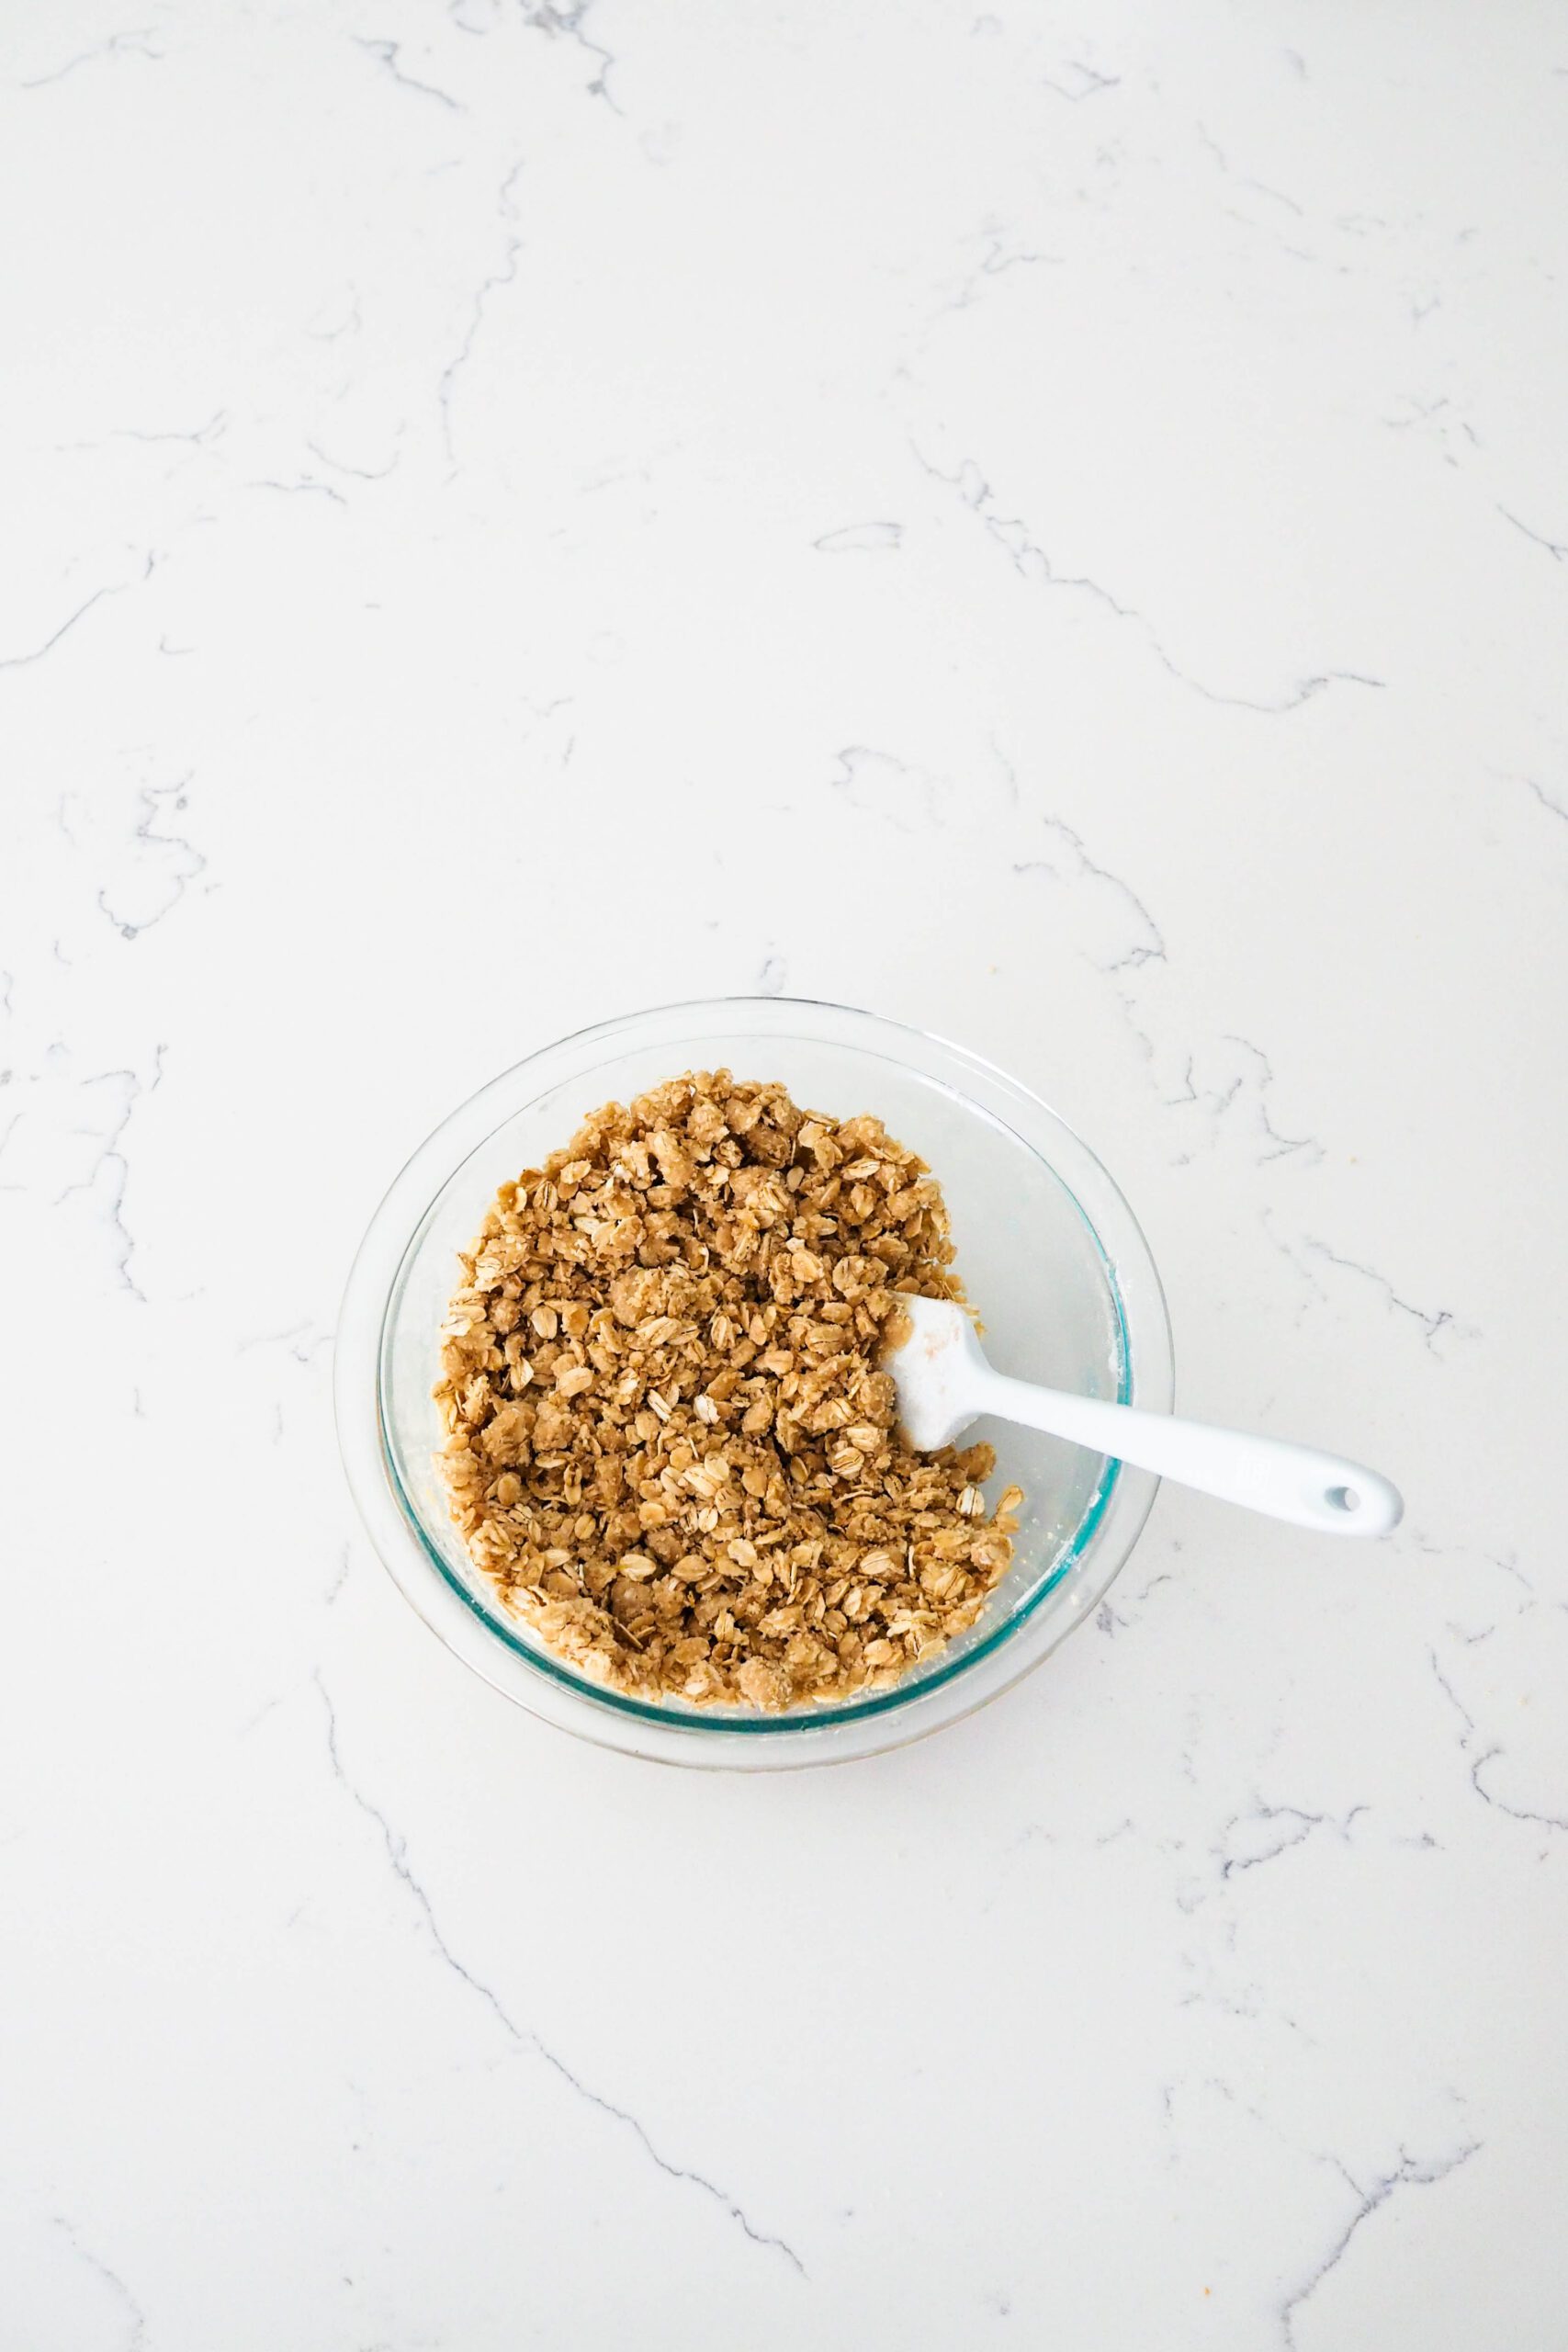 A bowl of oat crumble with a spatula sticking out.